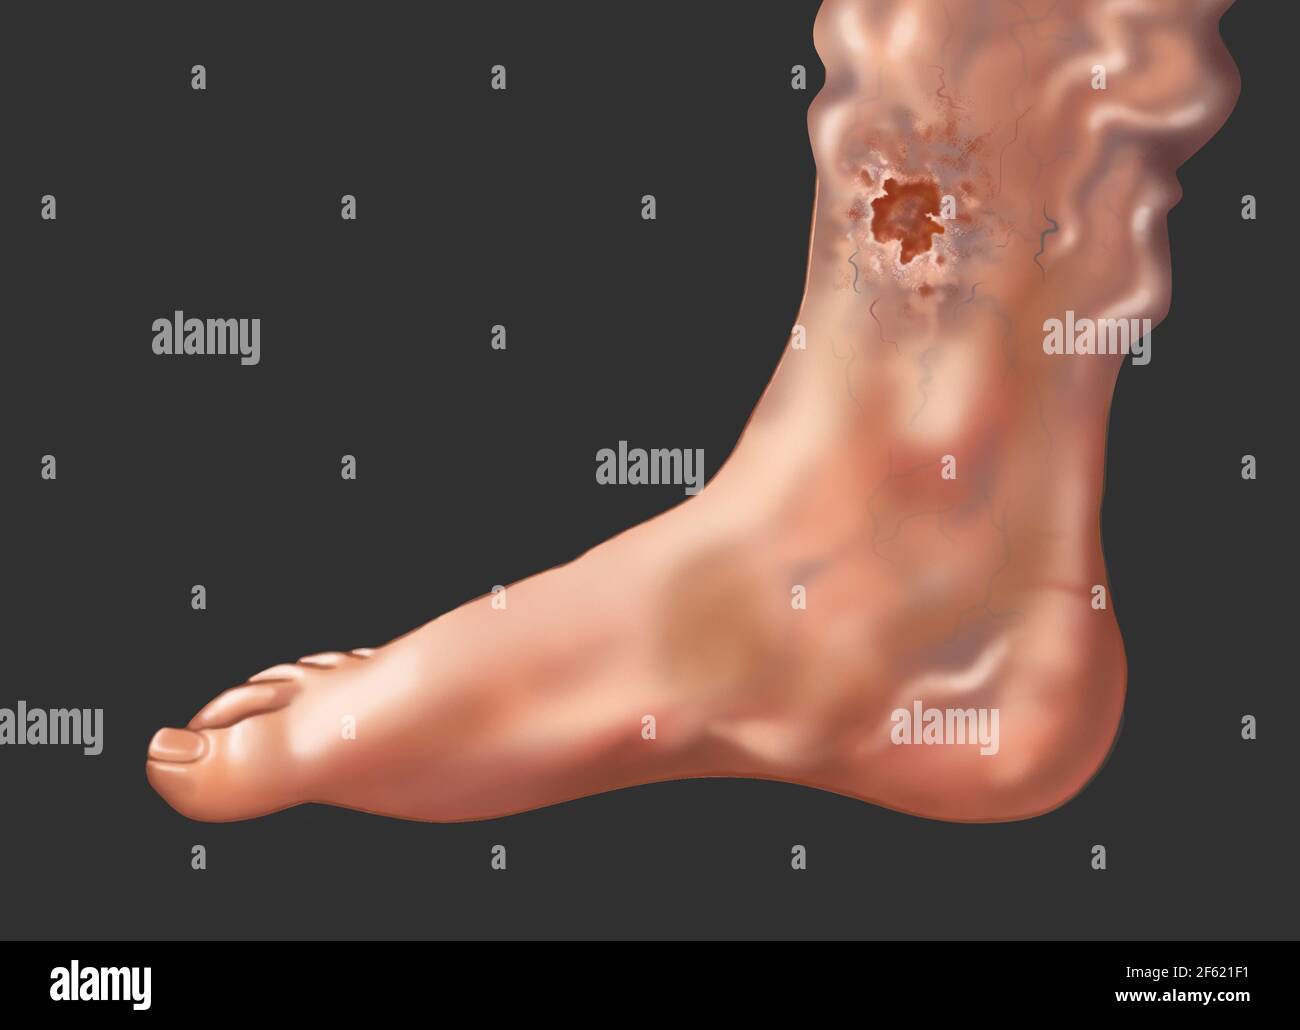 Skin Ulcer from a Varicose Vein on the Ankle Stock Photo